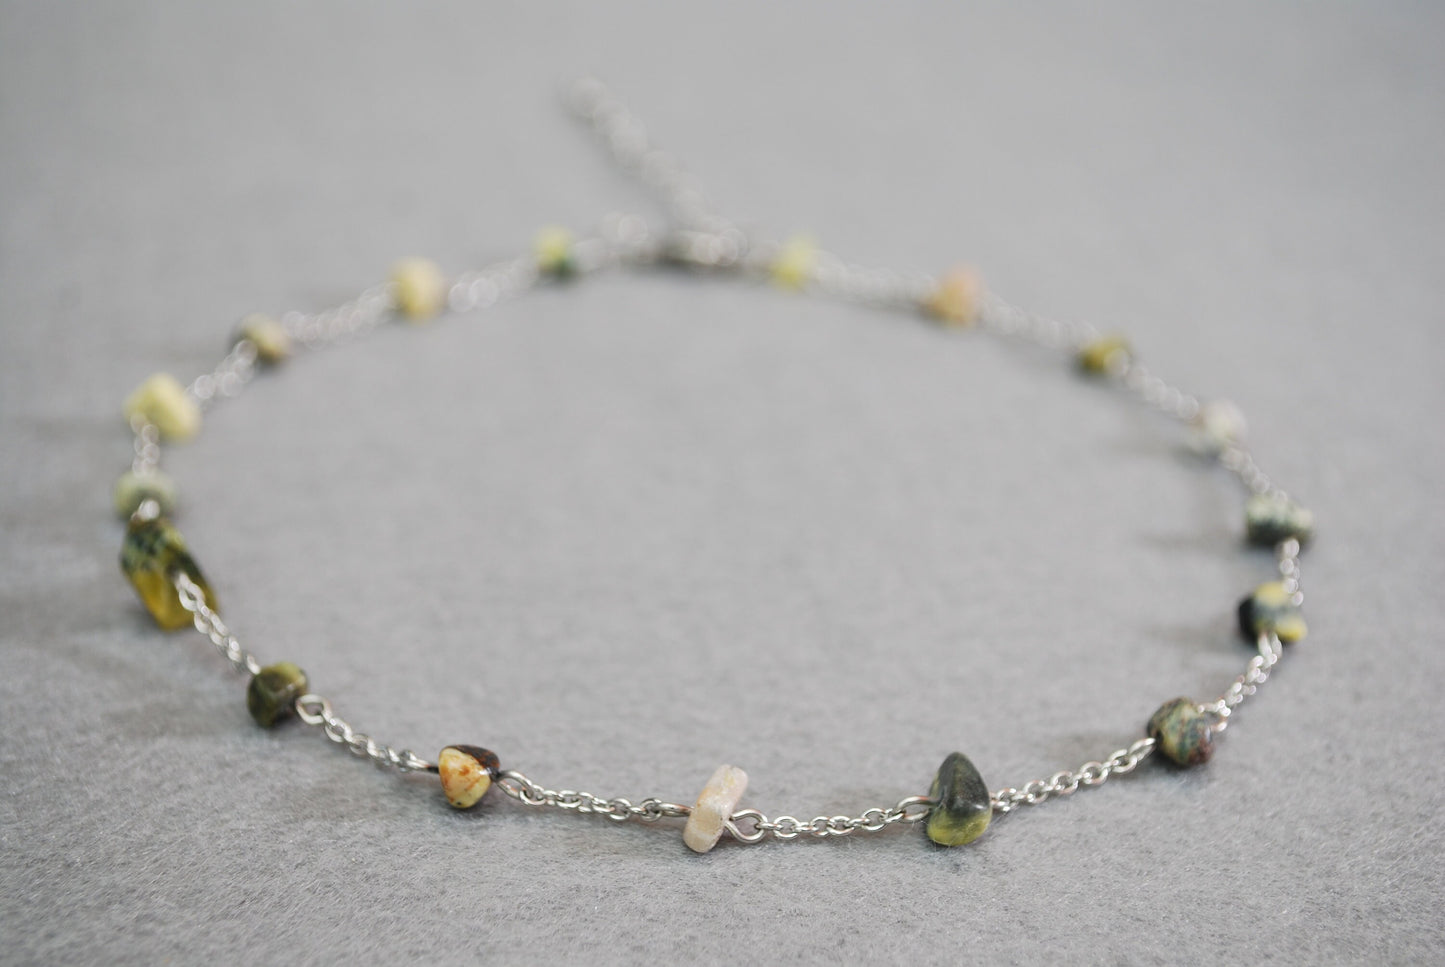 Serpentine stone choker and earrings set. Long stone earrings and beaded choker on stainless steel chain.